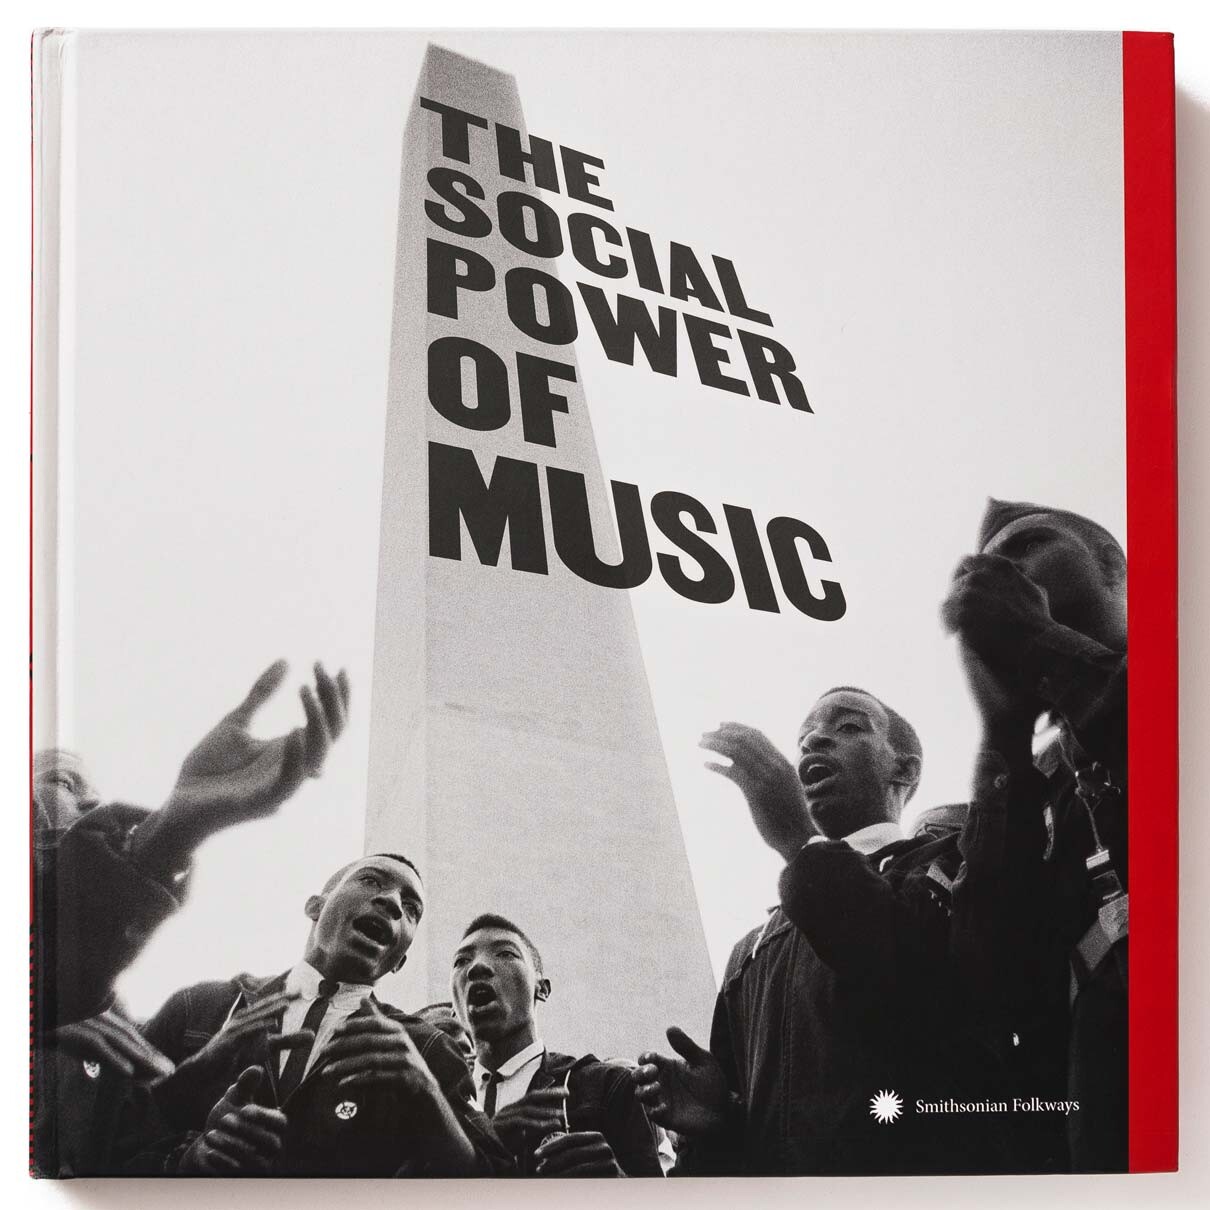 “The Social Power of Music” box set cover